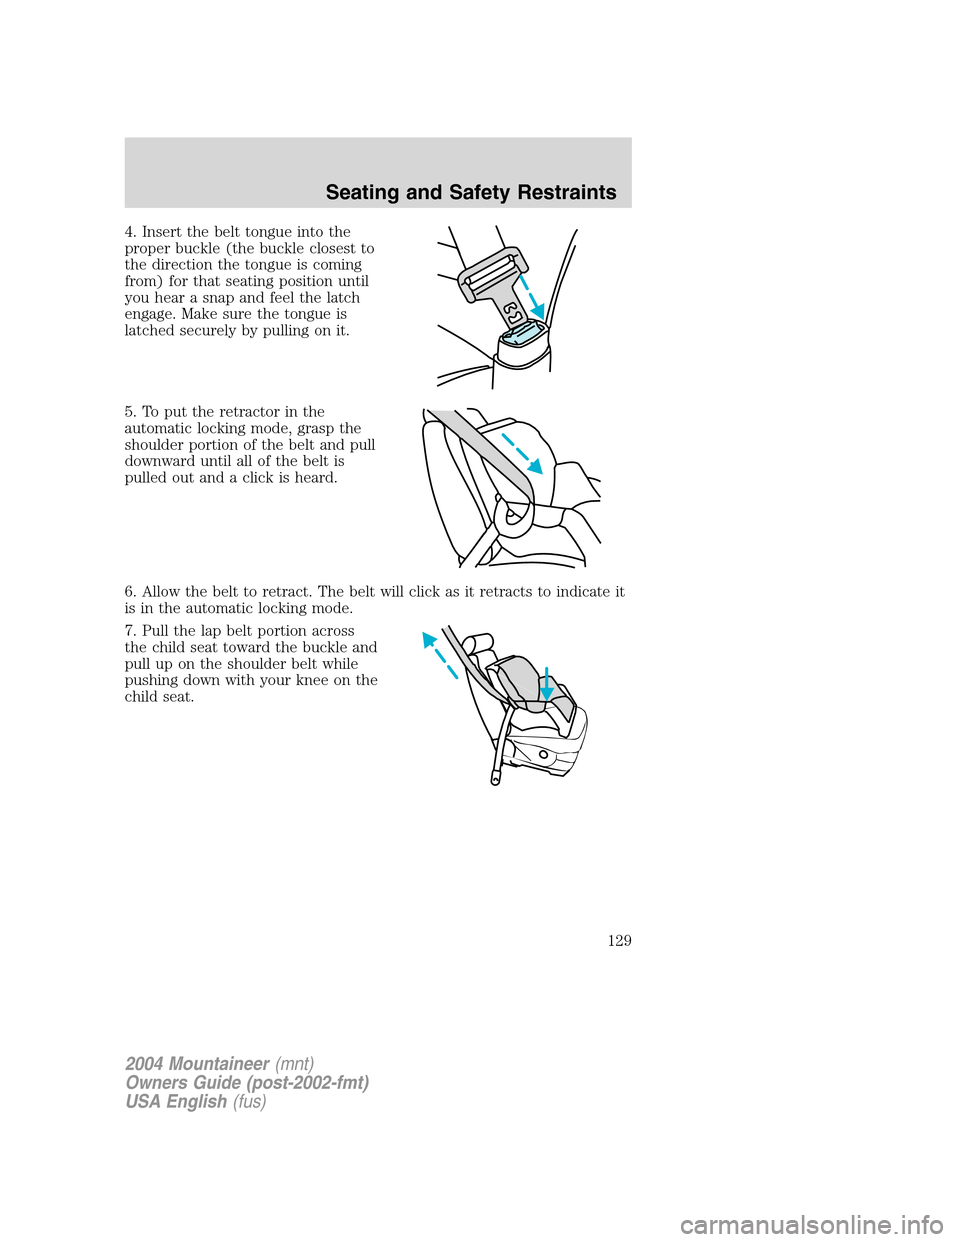 Mercury Mountaineer 2004  Owners Manuals 4. Insert the belt tongue into the
proper buckle (the buckle closest to
the direction the tongue is coming
from) for that seating position until
you hear a snap and feel the latch
engage. Make sure th